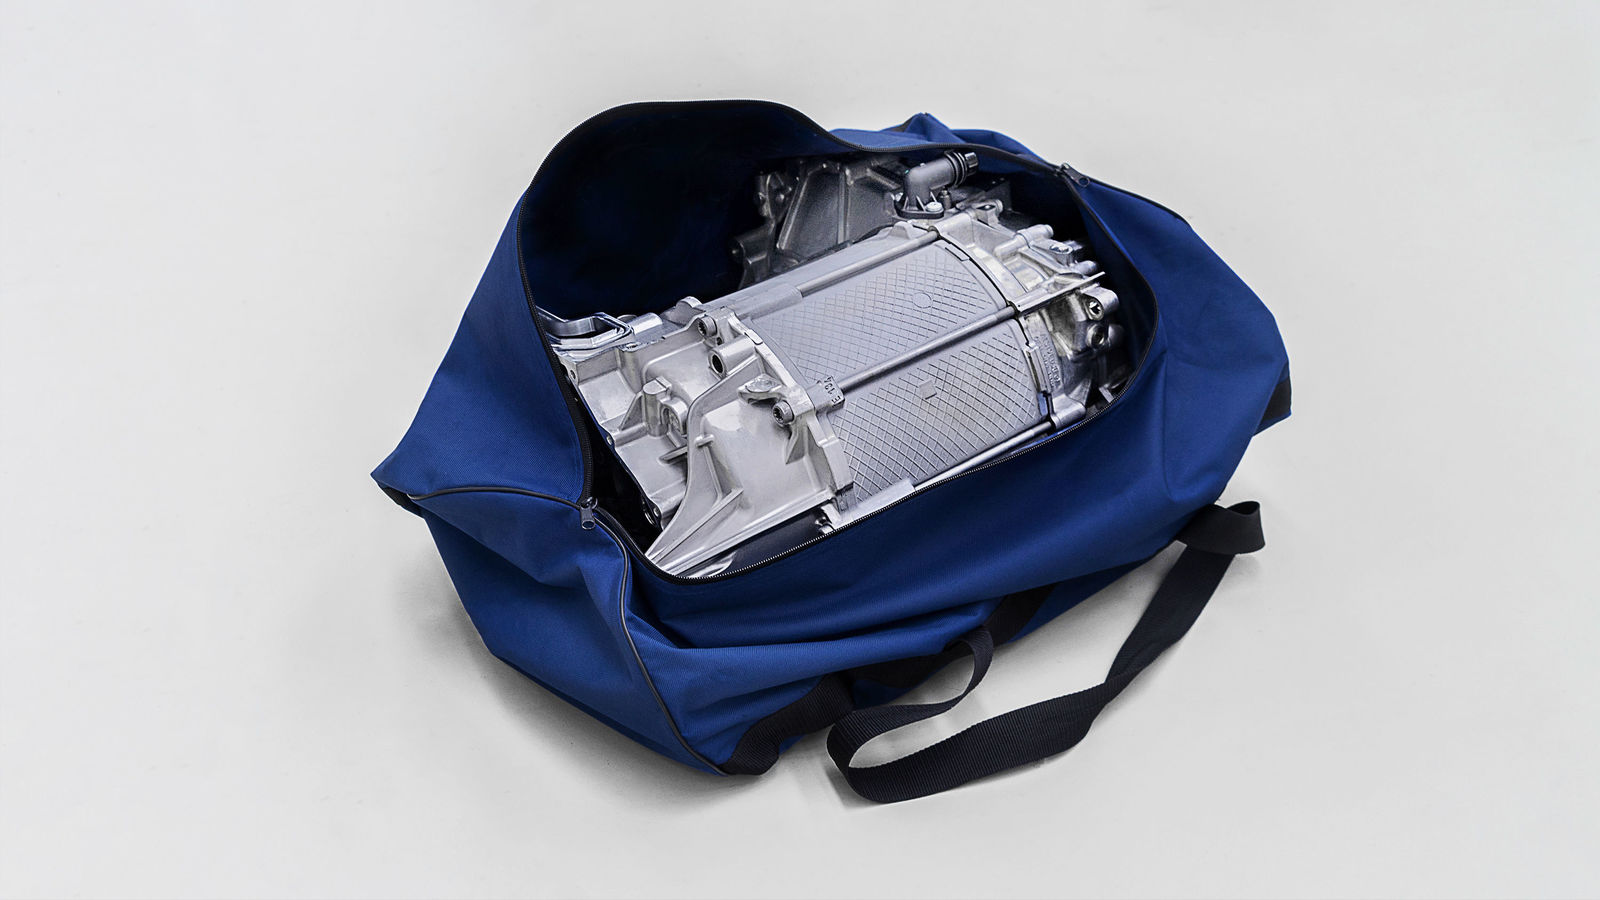 More than 200 horses in a sports bag – the electric drive in the  Volkswagen ID.3